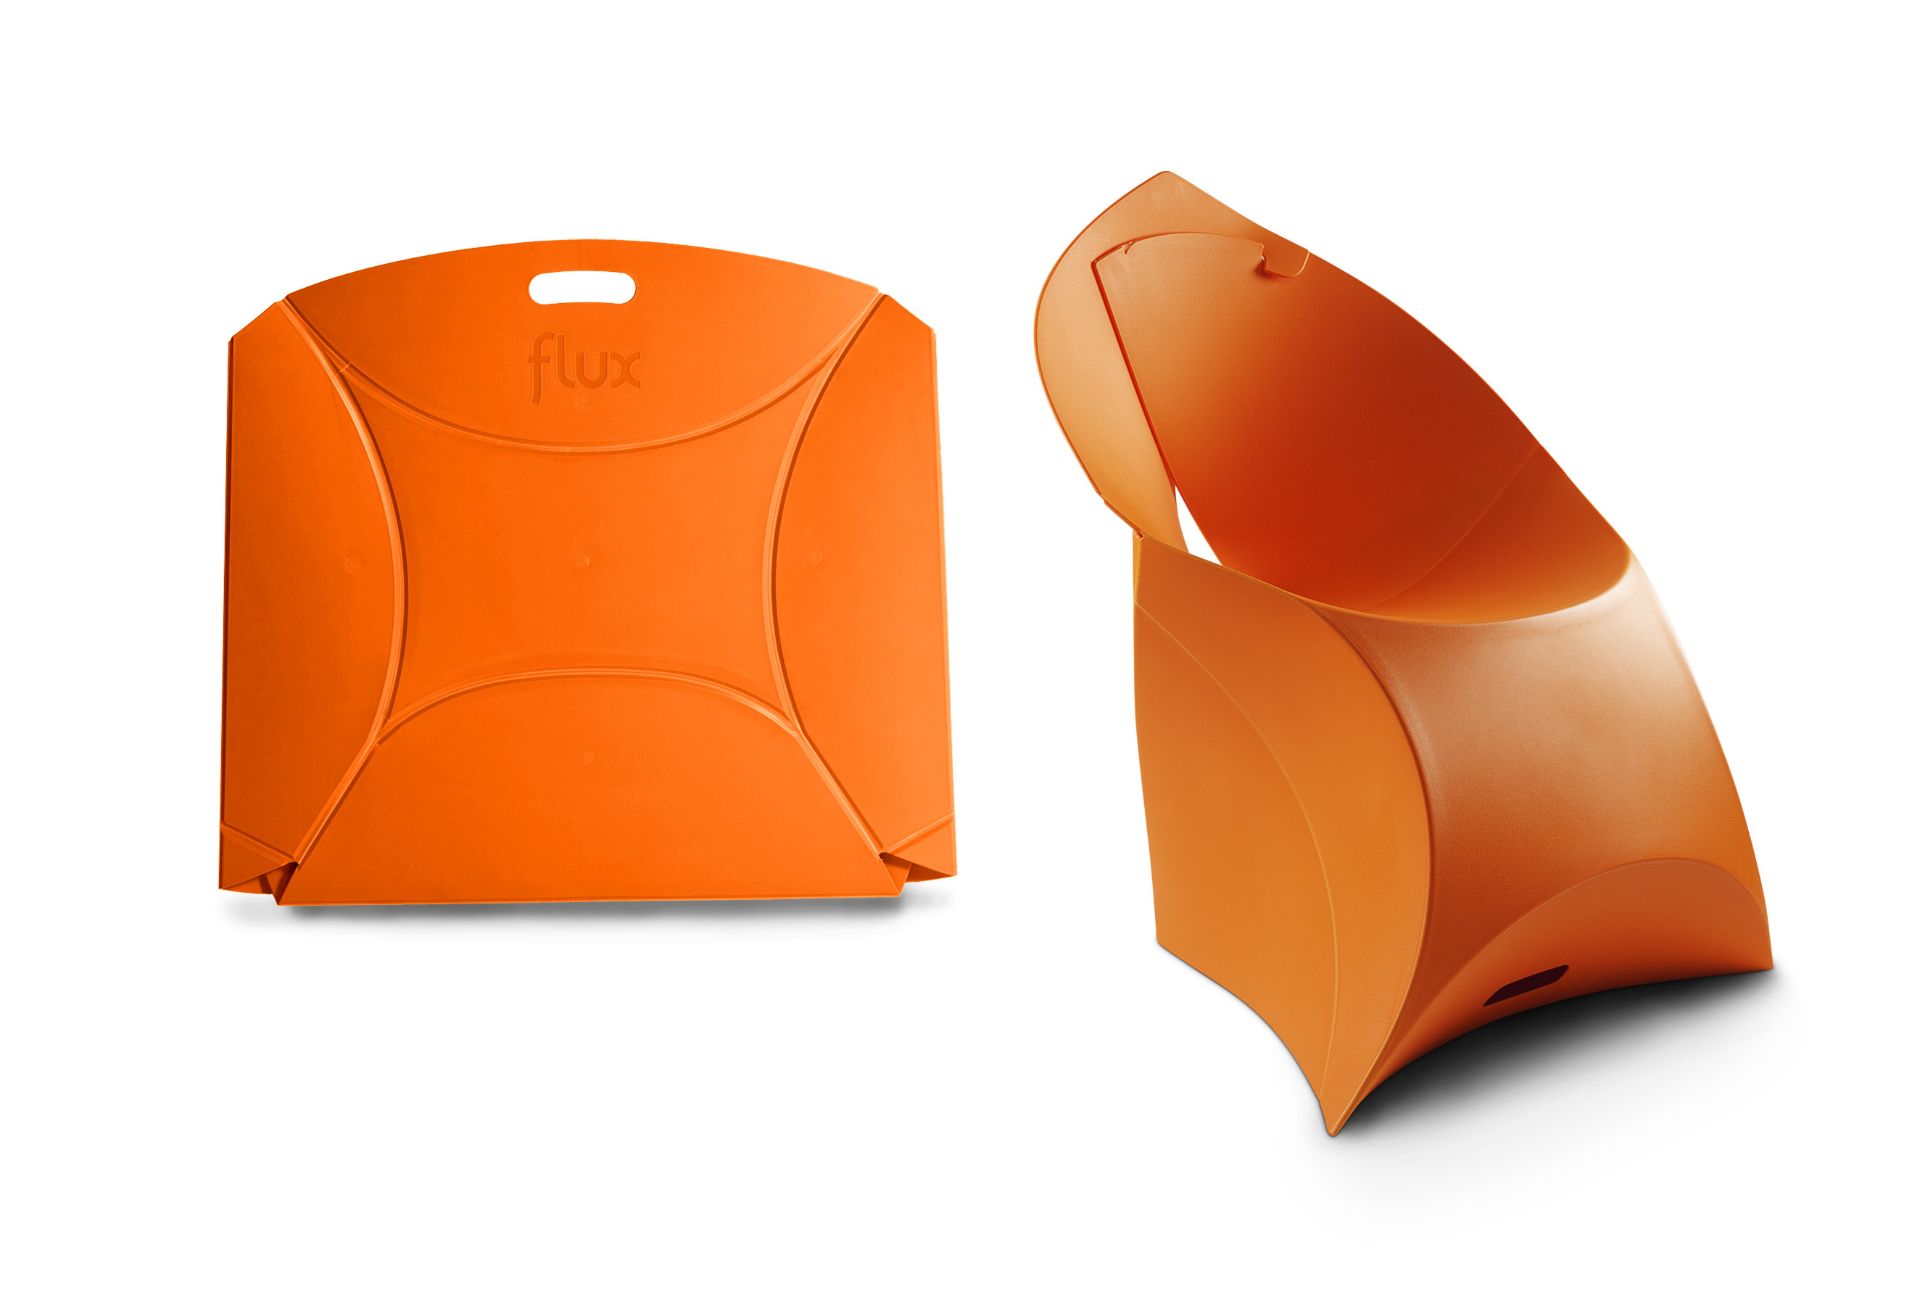 The Flux Foldable Chair . Our Award-Winning Dutch Design. - Orange - Used - RRP £120